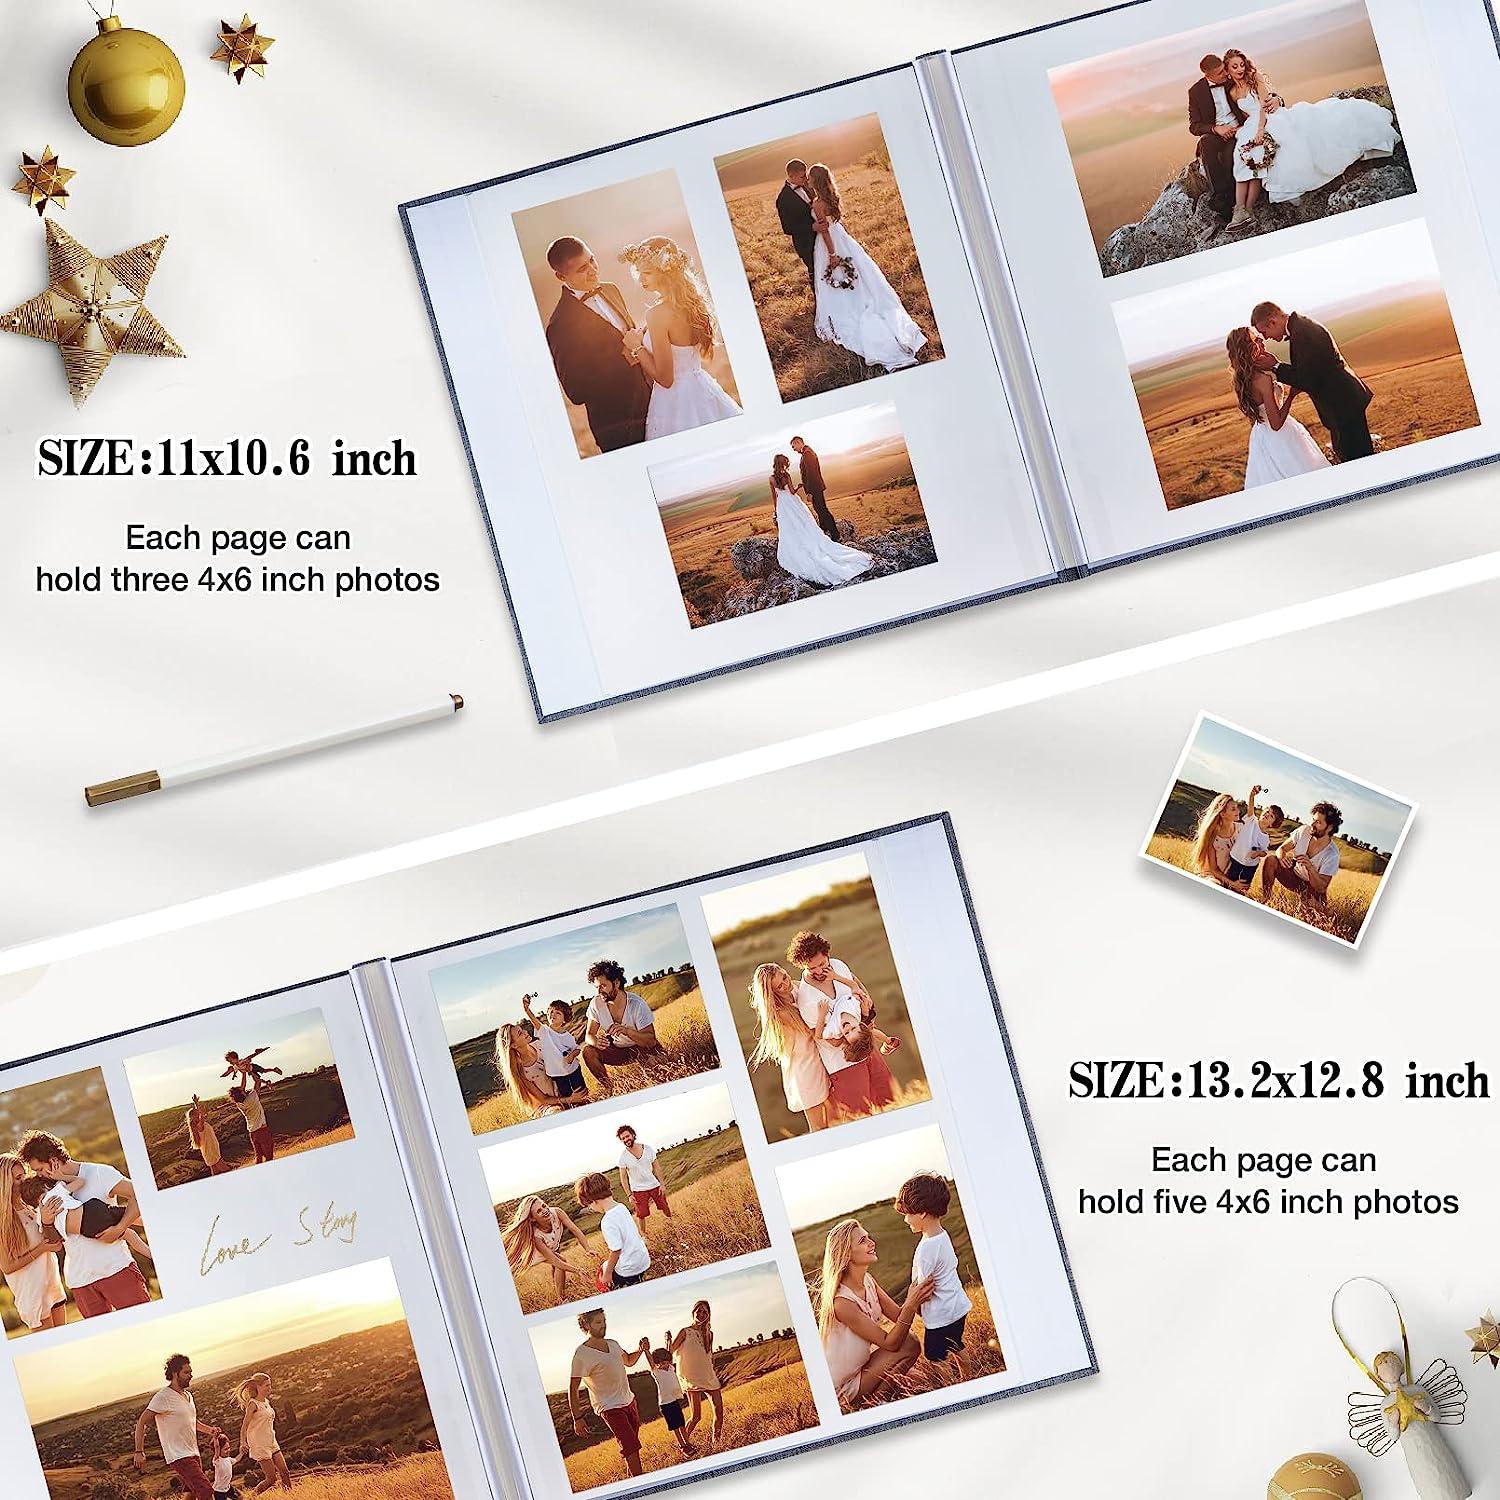 Photo Album Self Adhesive Pages for 4x6 5x7 8x10 Pictures Scrapbook  Magnetic Photo Albums with Sticky Pages Books with A Metallic Pen for Baby  Wedding